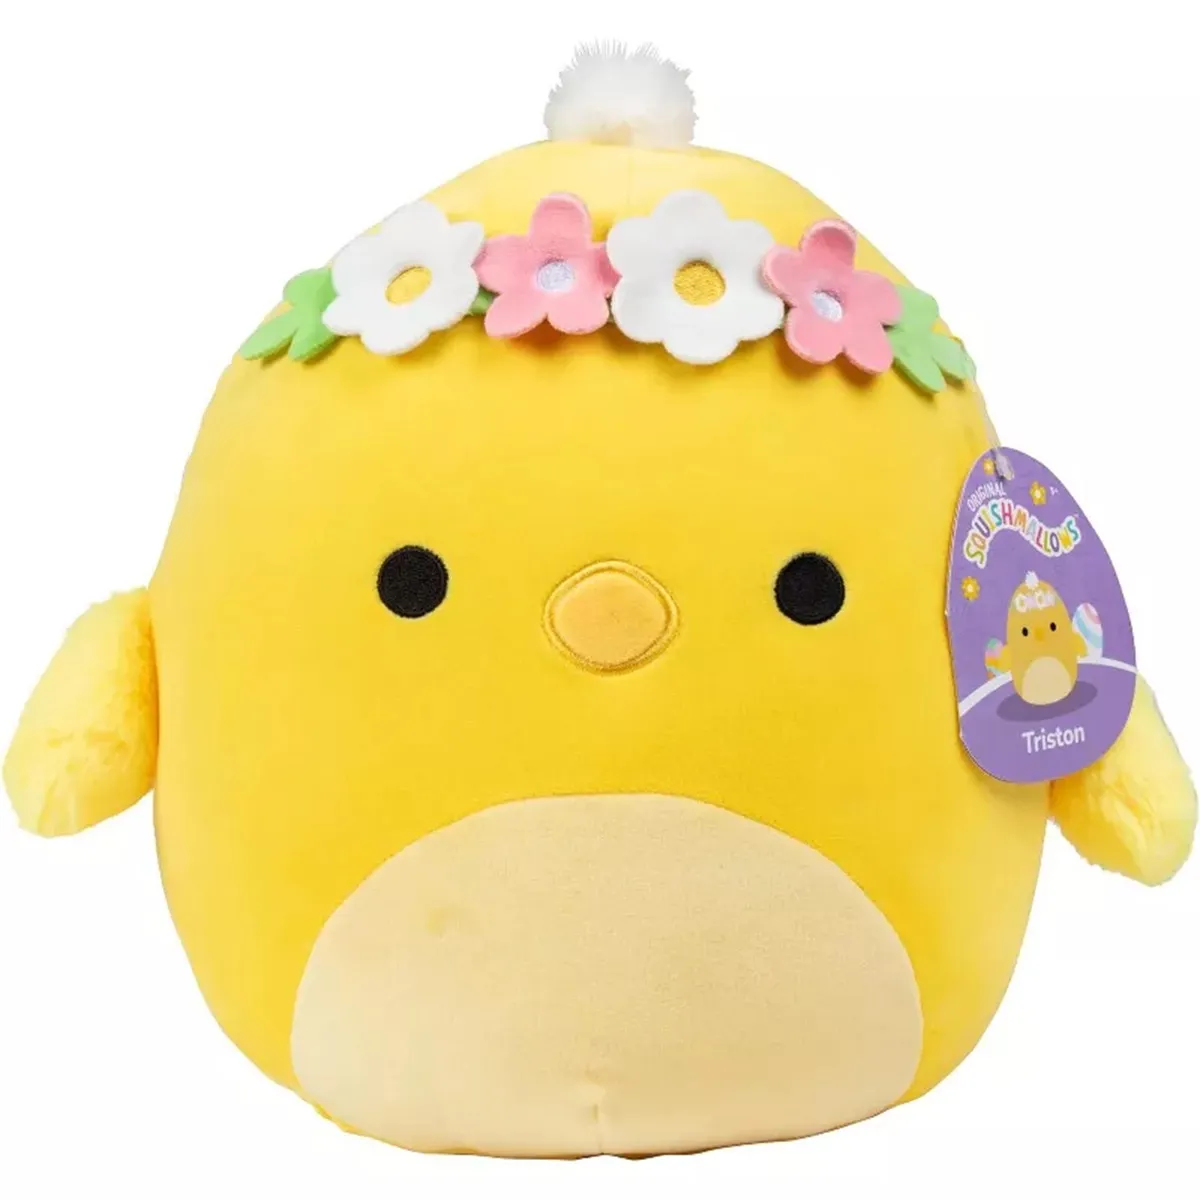 Easter Squishmallow Tristan the Chick with flower crown